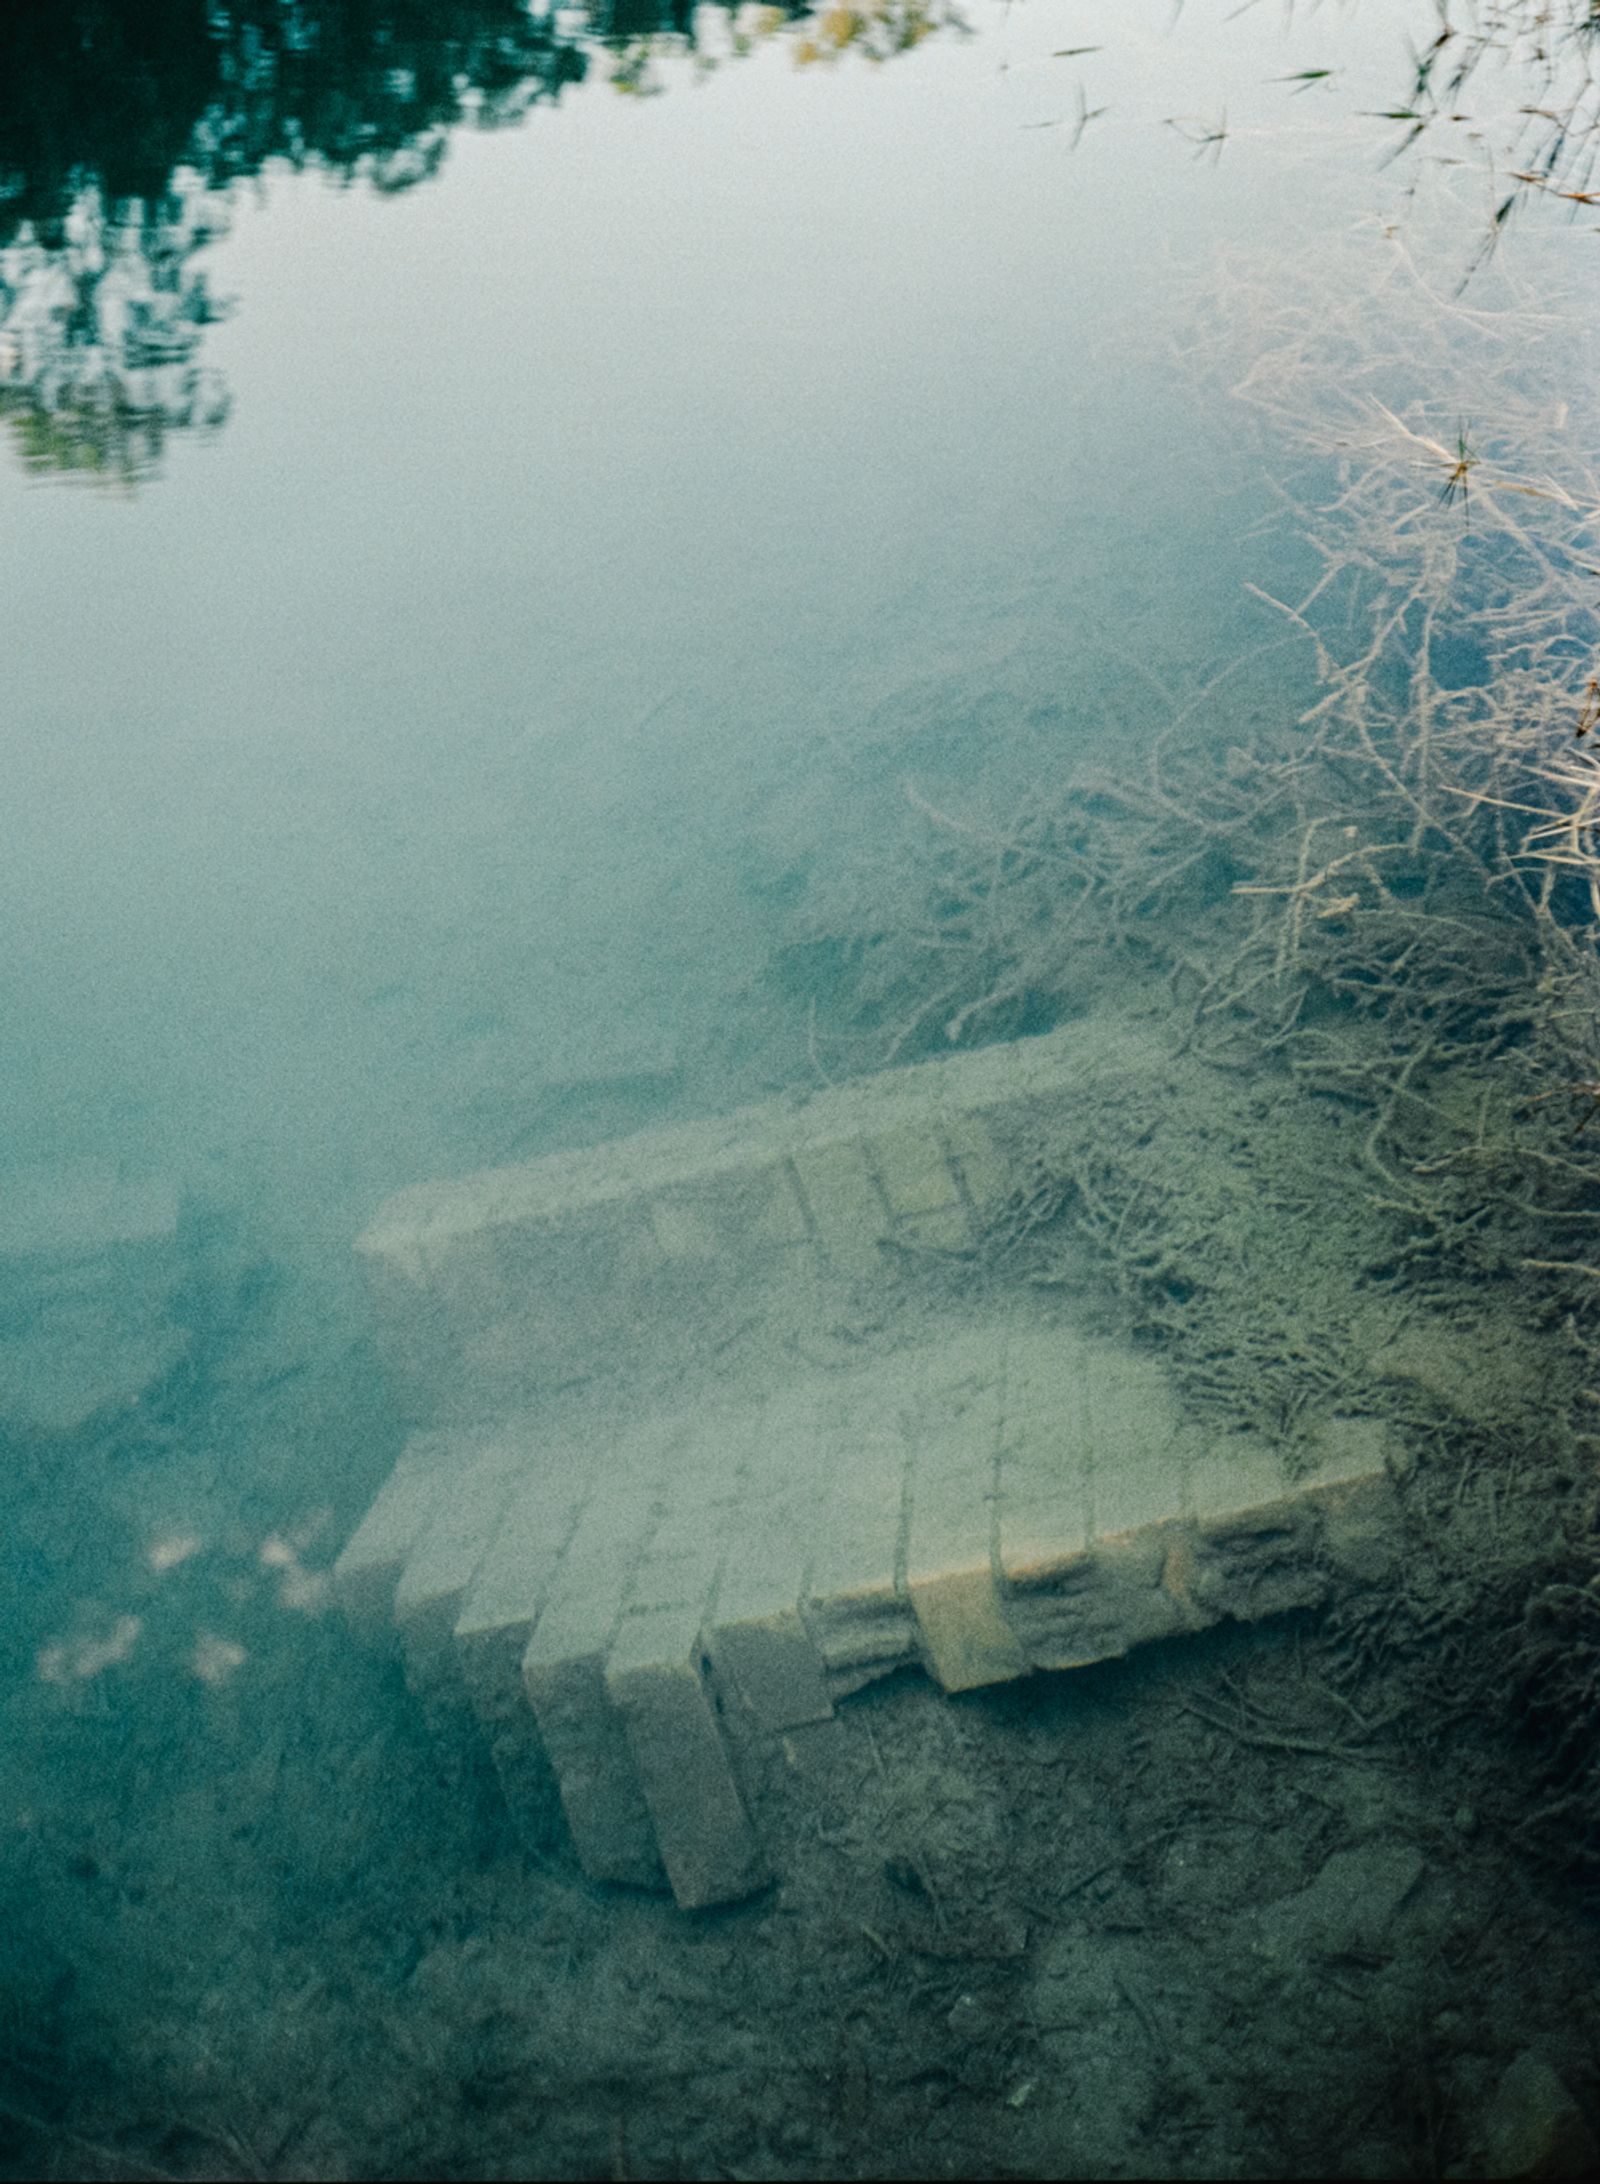 © Tajette O'halloran - Image from the The Quarry photography project